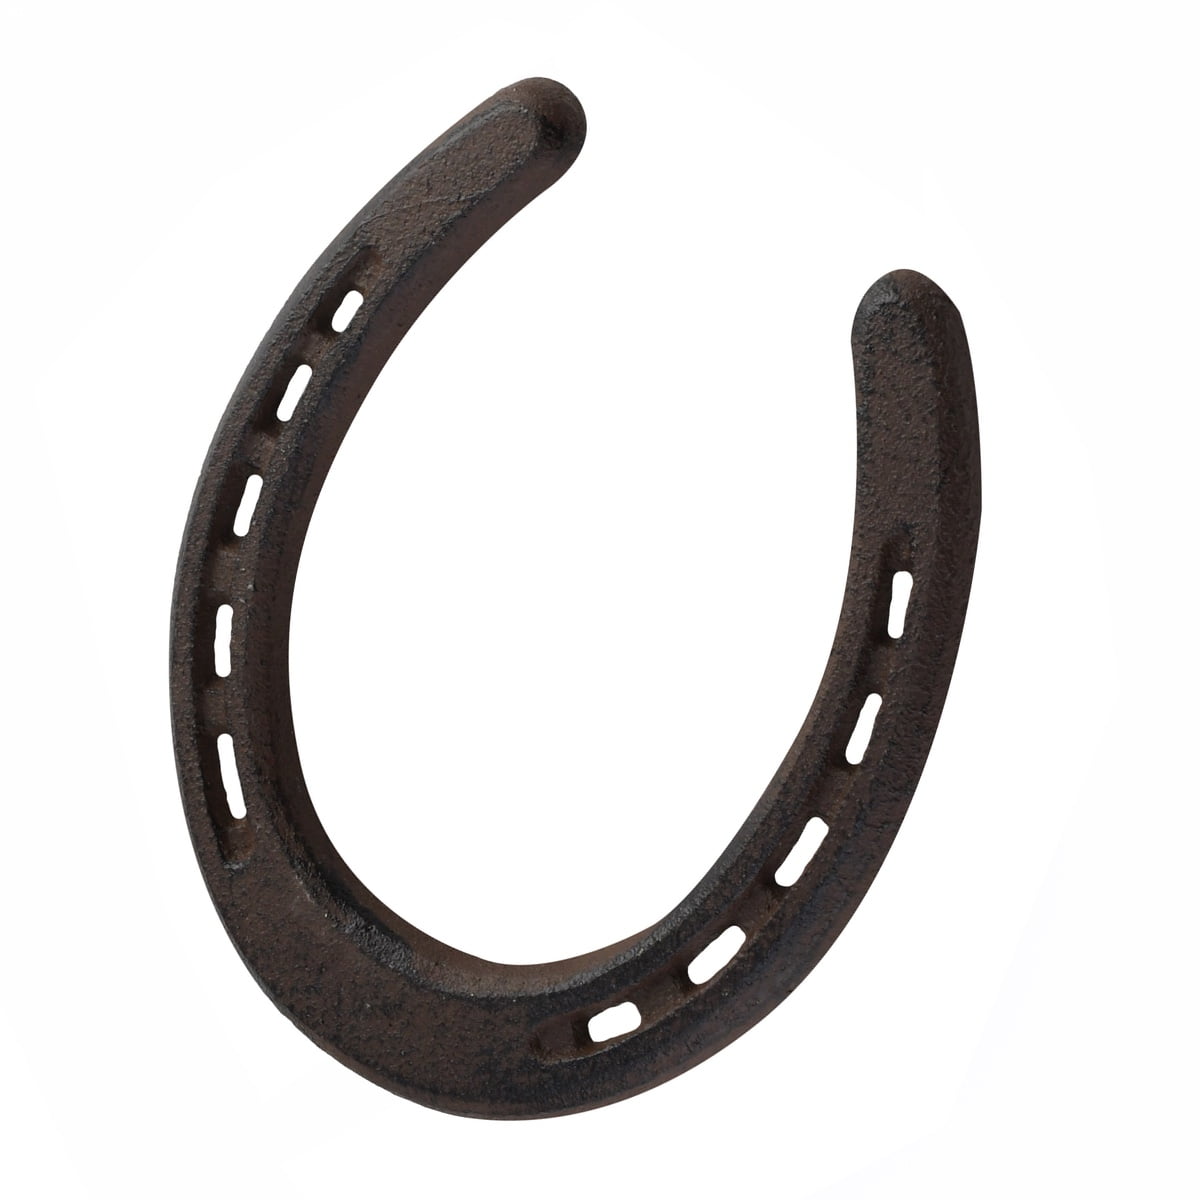  OFFSCH Horseshoe Decoration Horse Shoes for Decorations Medium  Horseshoe Rustic Horseshoe Plaque Good Luck Ornament Bathroom Decorations  Iron Wall Decors Statue Cast Iron Western Style : Home & Kitchen